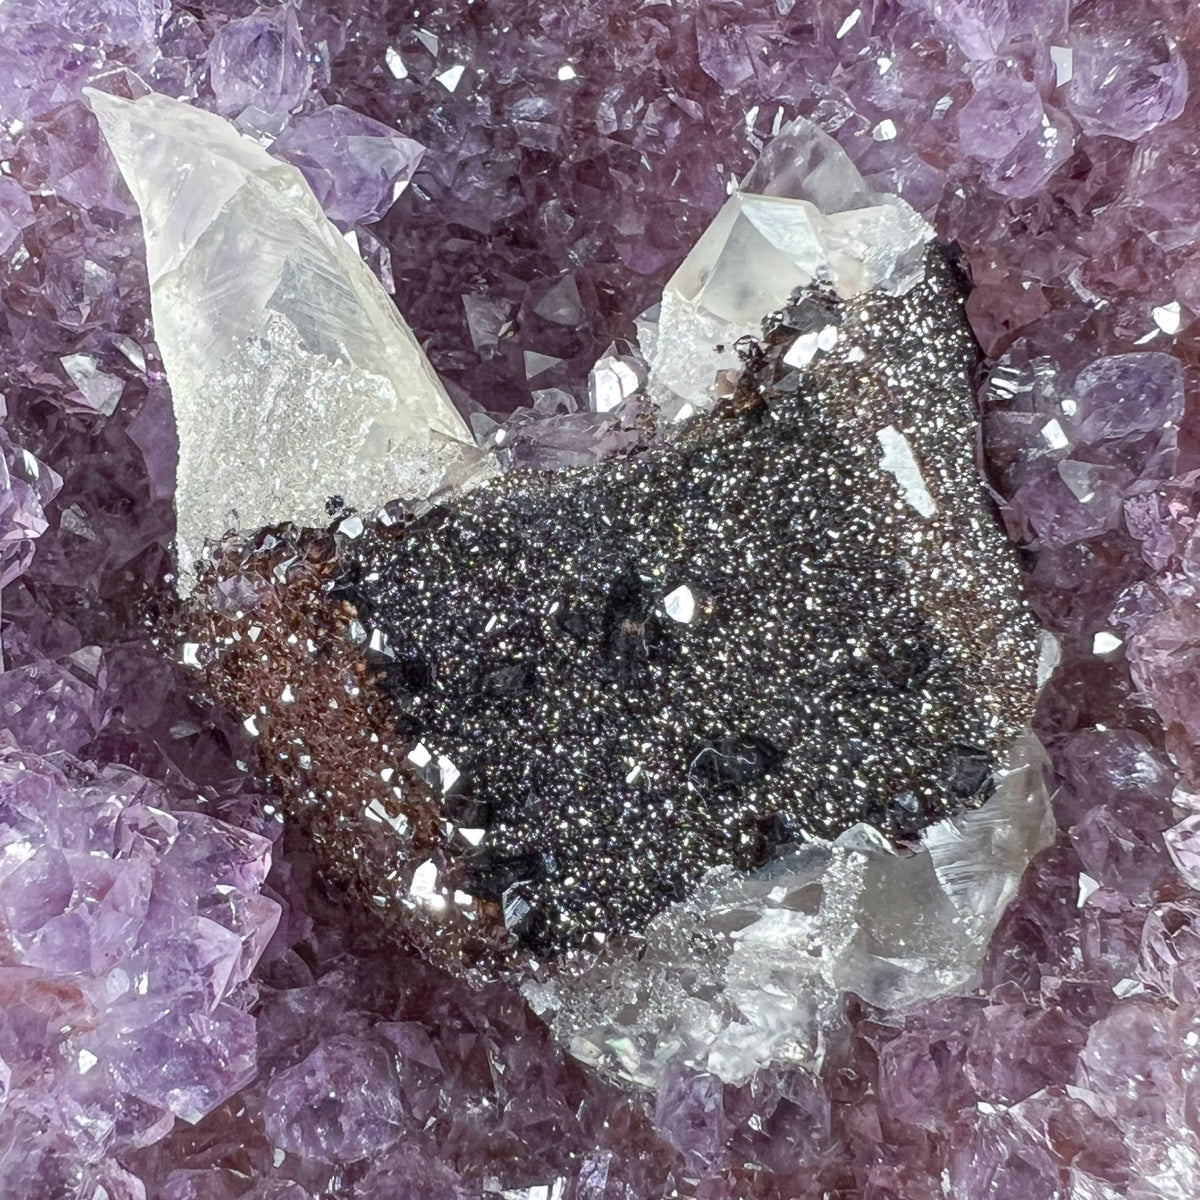 Amethyst Geode with Calcite and Hematite Crystals